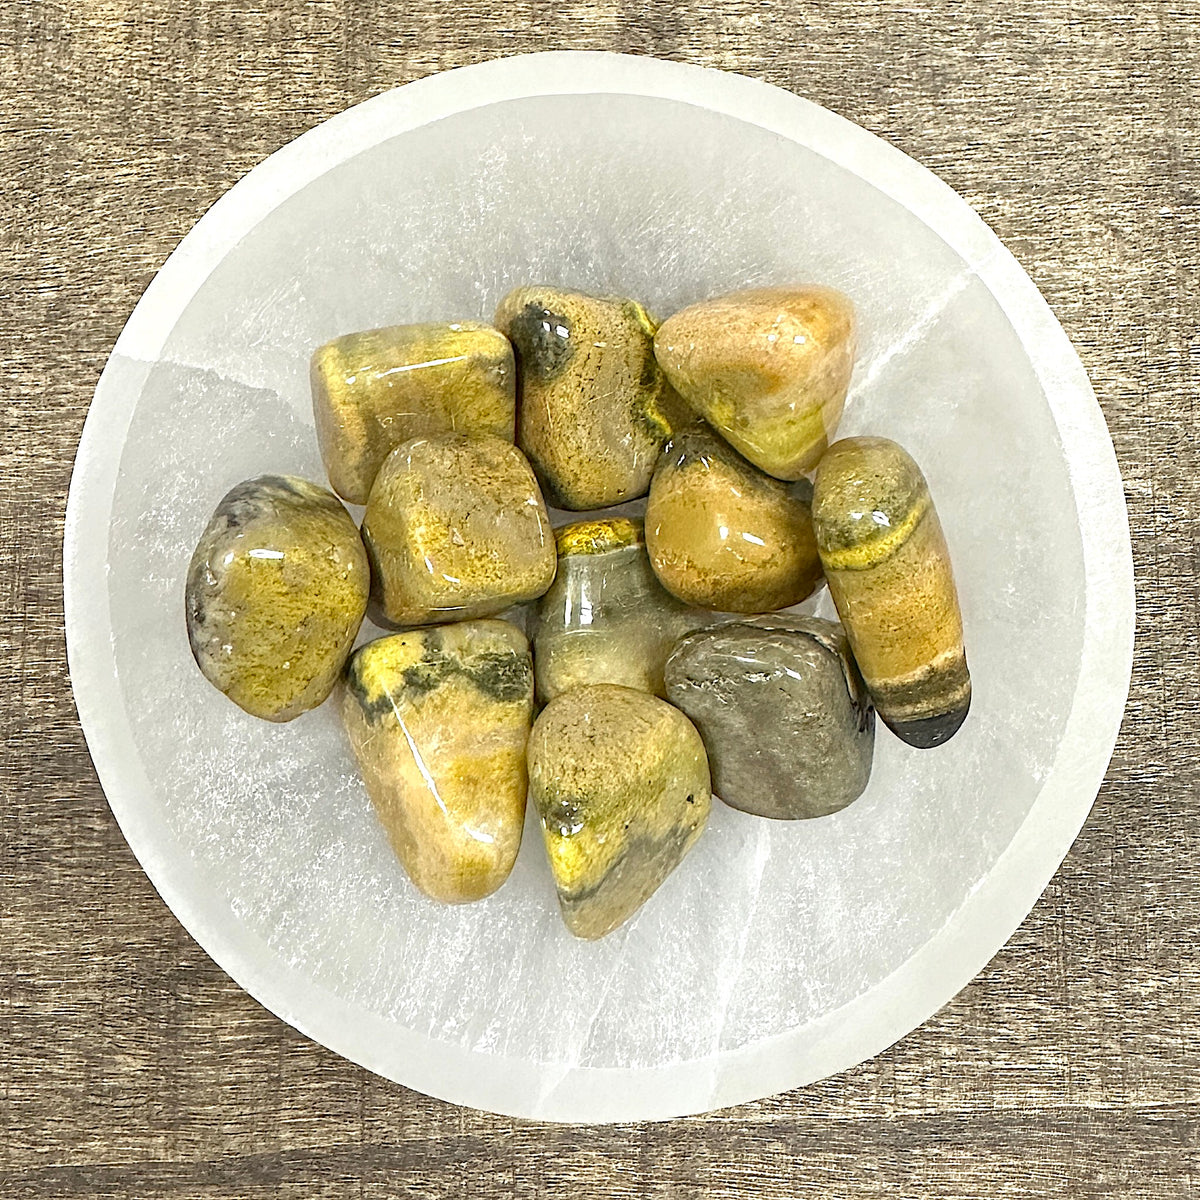 Shot of various bumblebee jasper tumbled stones in a bowl